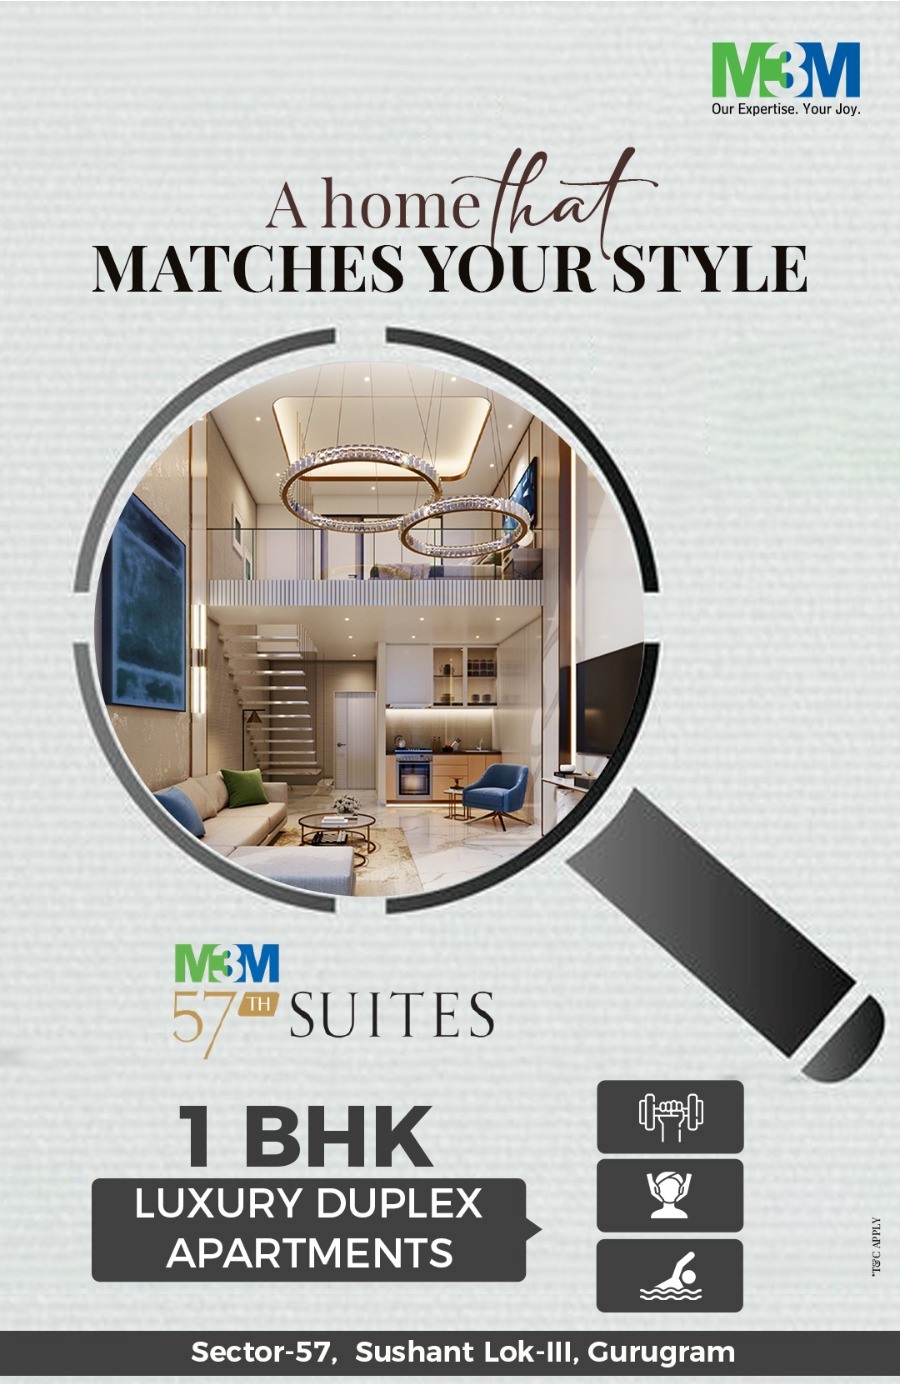 A home that matches your style at M3M 57th Suites, Gurgaon